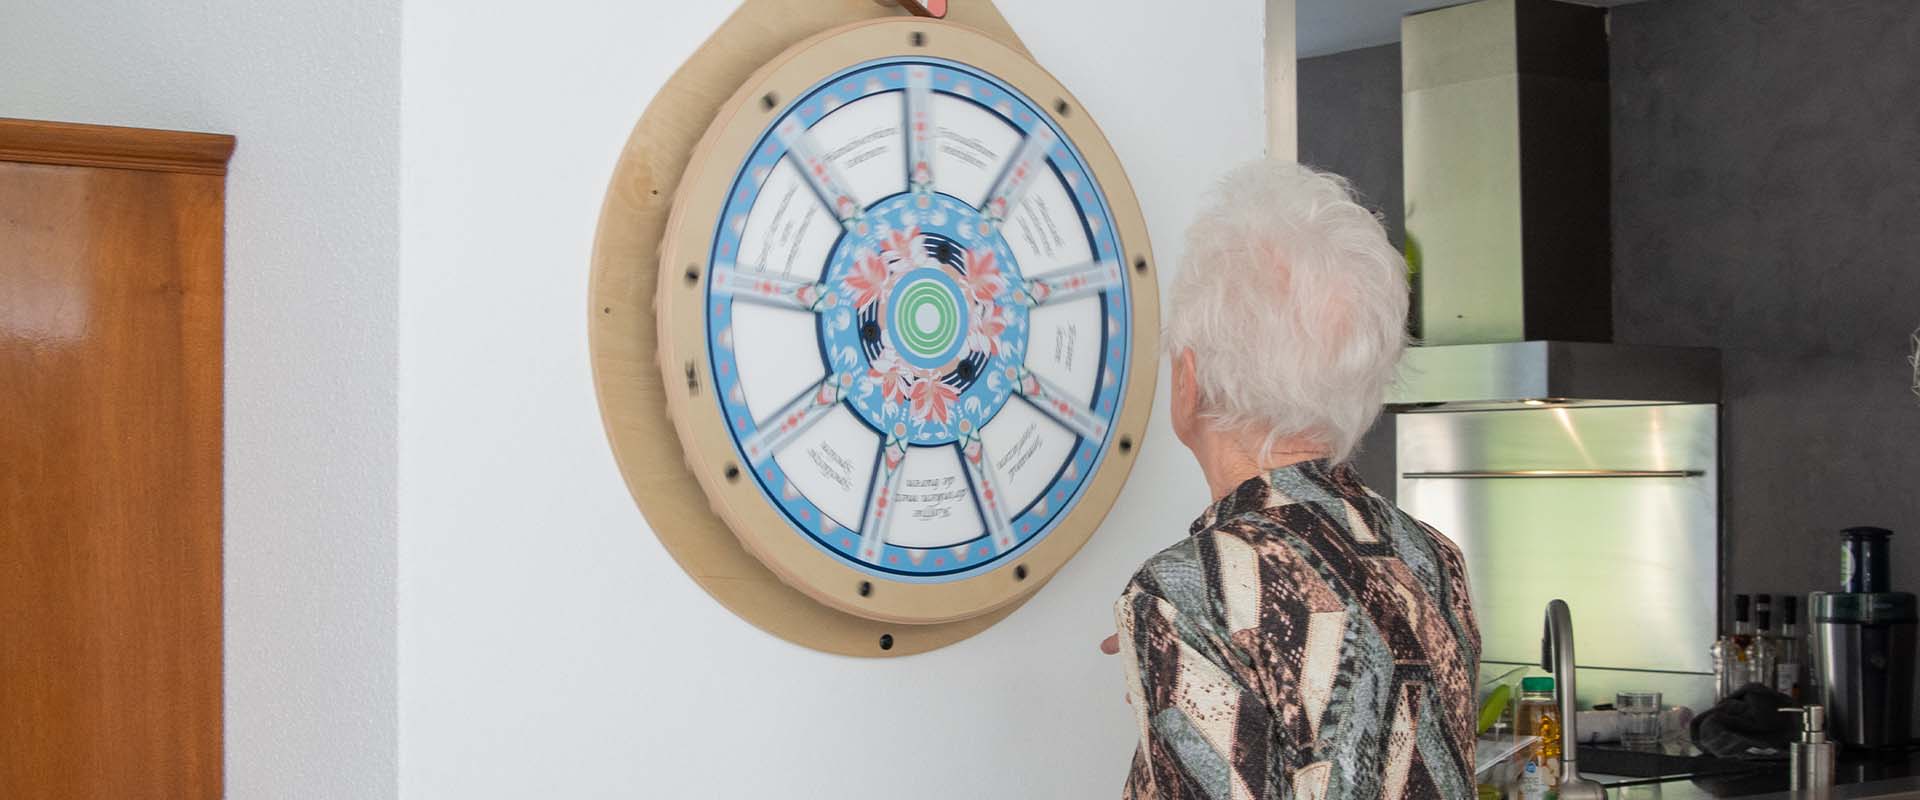 inspirational wall game for a fun day out with residents of a care home 